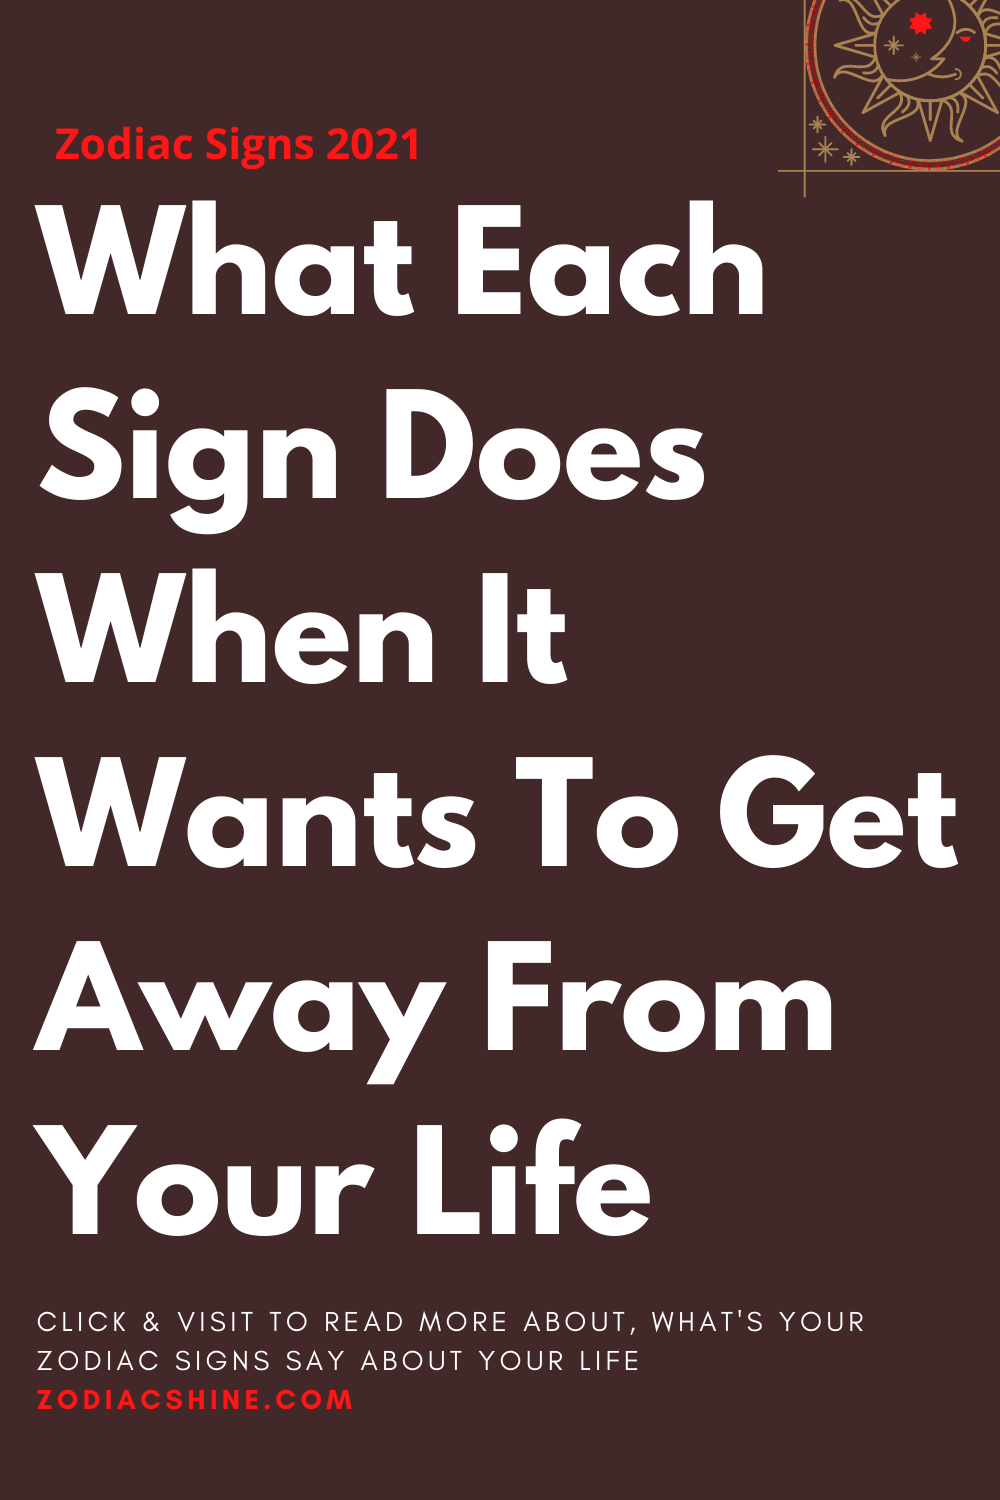 What Each Sign Does When It Wants To Get Away From Your Life